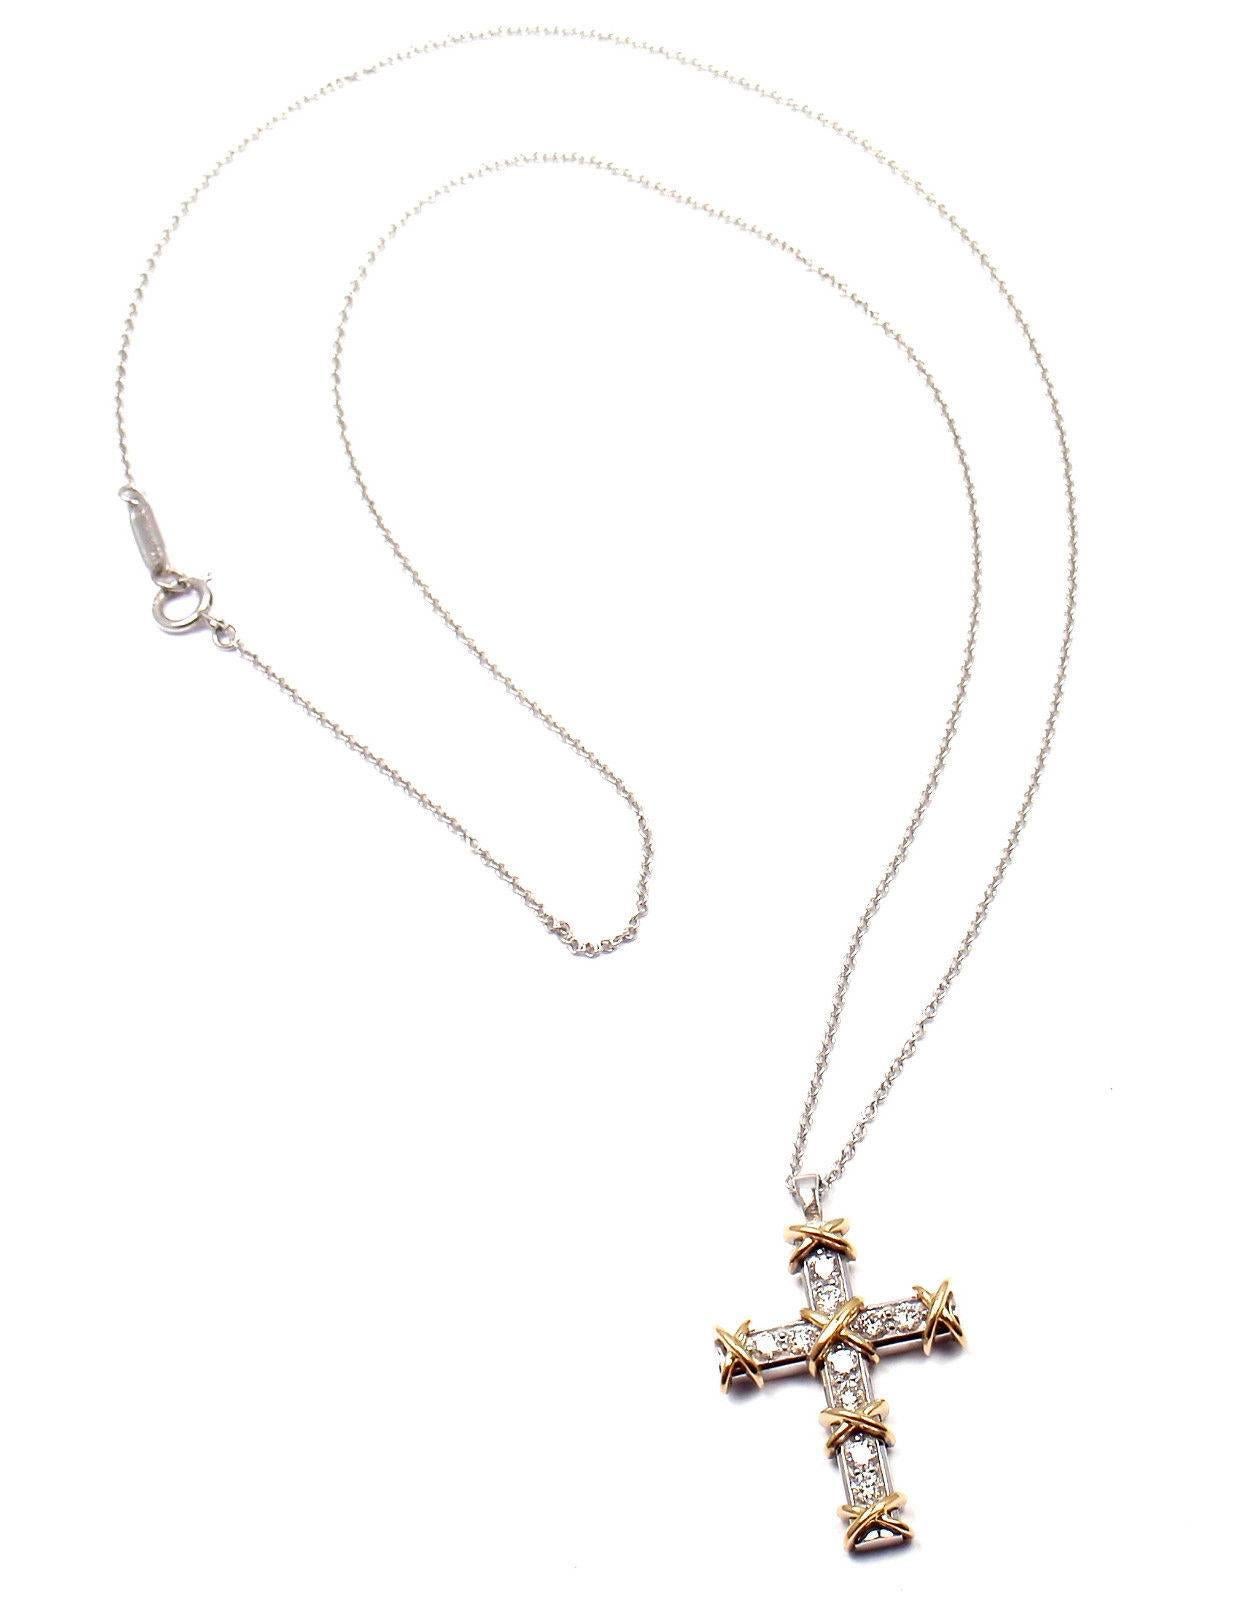 Platinum & 18k Yellow Gold Diamond Cross Pendant Necklace by Jean Schlumberger for Tiffany & Co. 
With 10 round brilliant cut diamonds VVS1 clarity, G color total weight approx. .35ct
Details: 
Length: 19